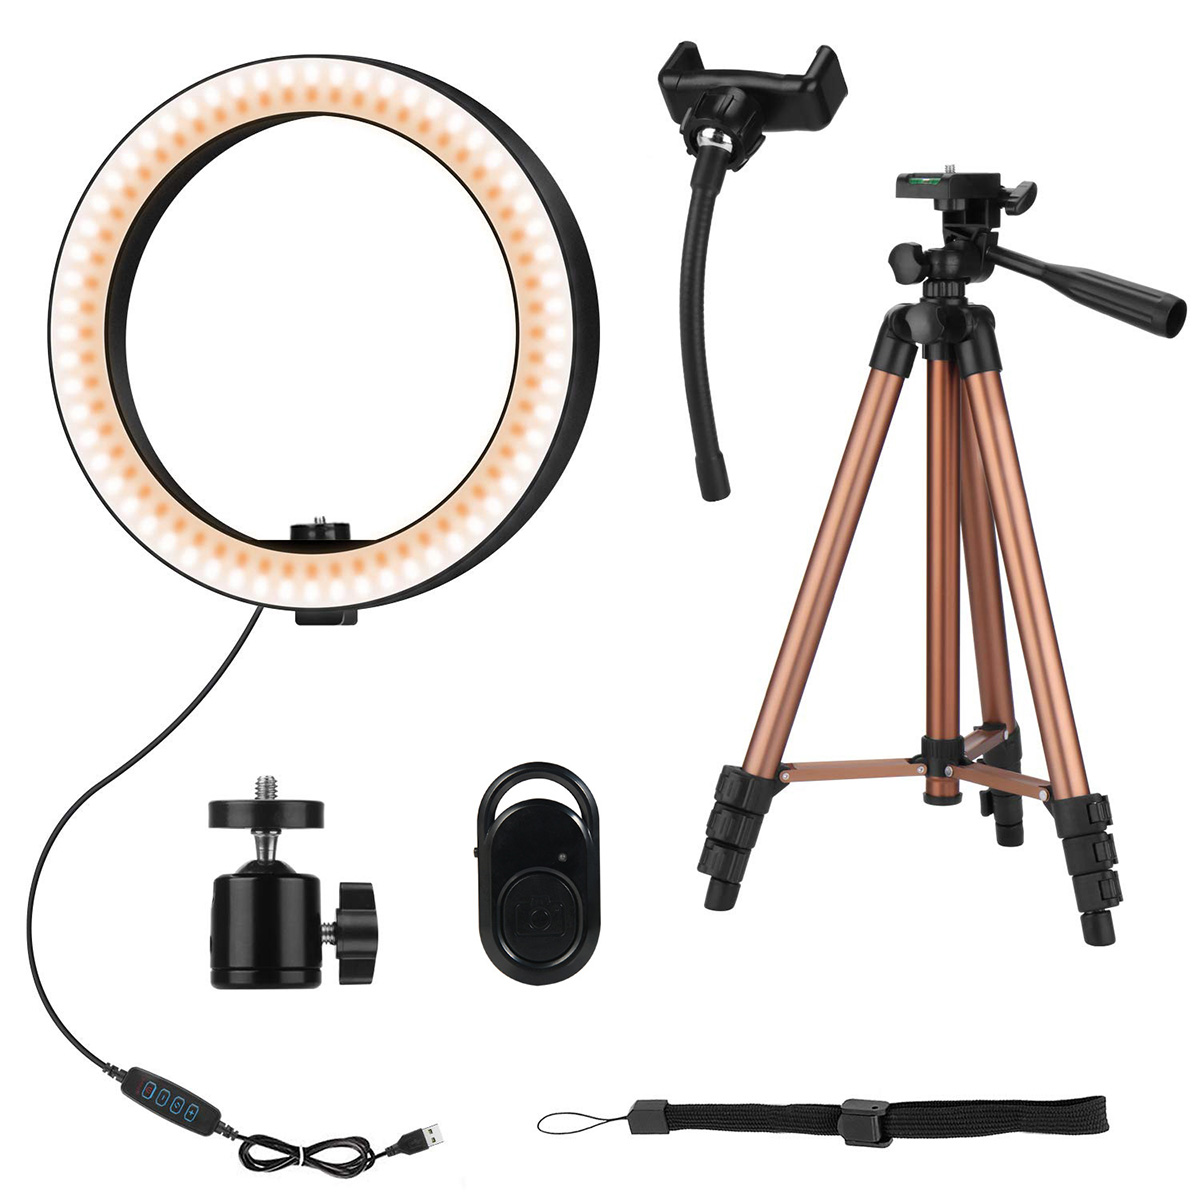 Controllable-6-inch-10-inch-LED-Selfie-Ring-Light--Tripod-Stand--Phone-Holder-Photography-YouTube-Vi-1646618-7